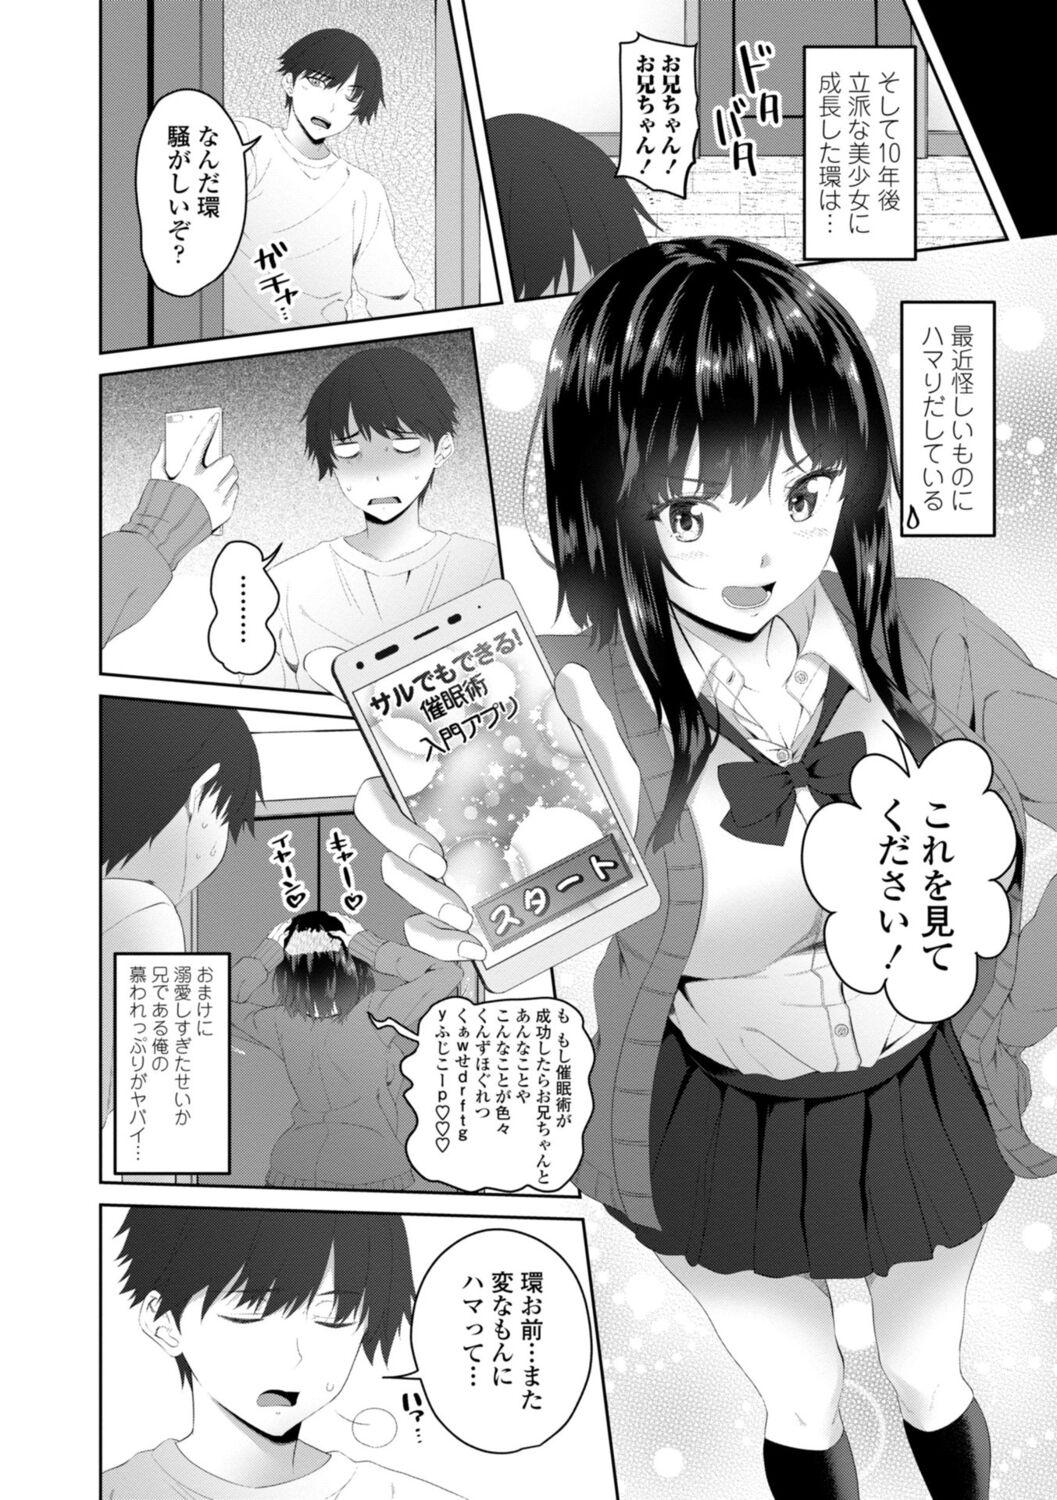 Hot Naked Women [Arsenal] Onii-chan no H na Otoshikata - How to make your brother like you for sex. [Digital] Fucking Hard - Page 6